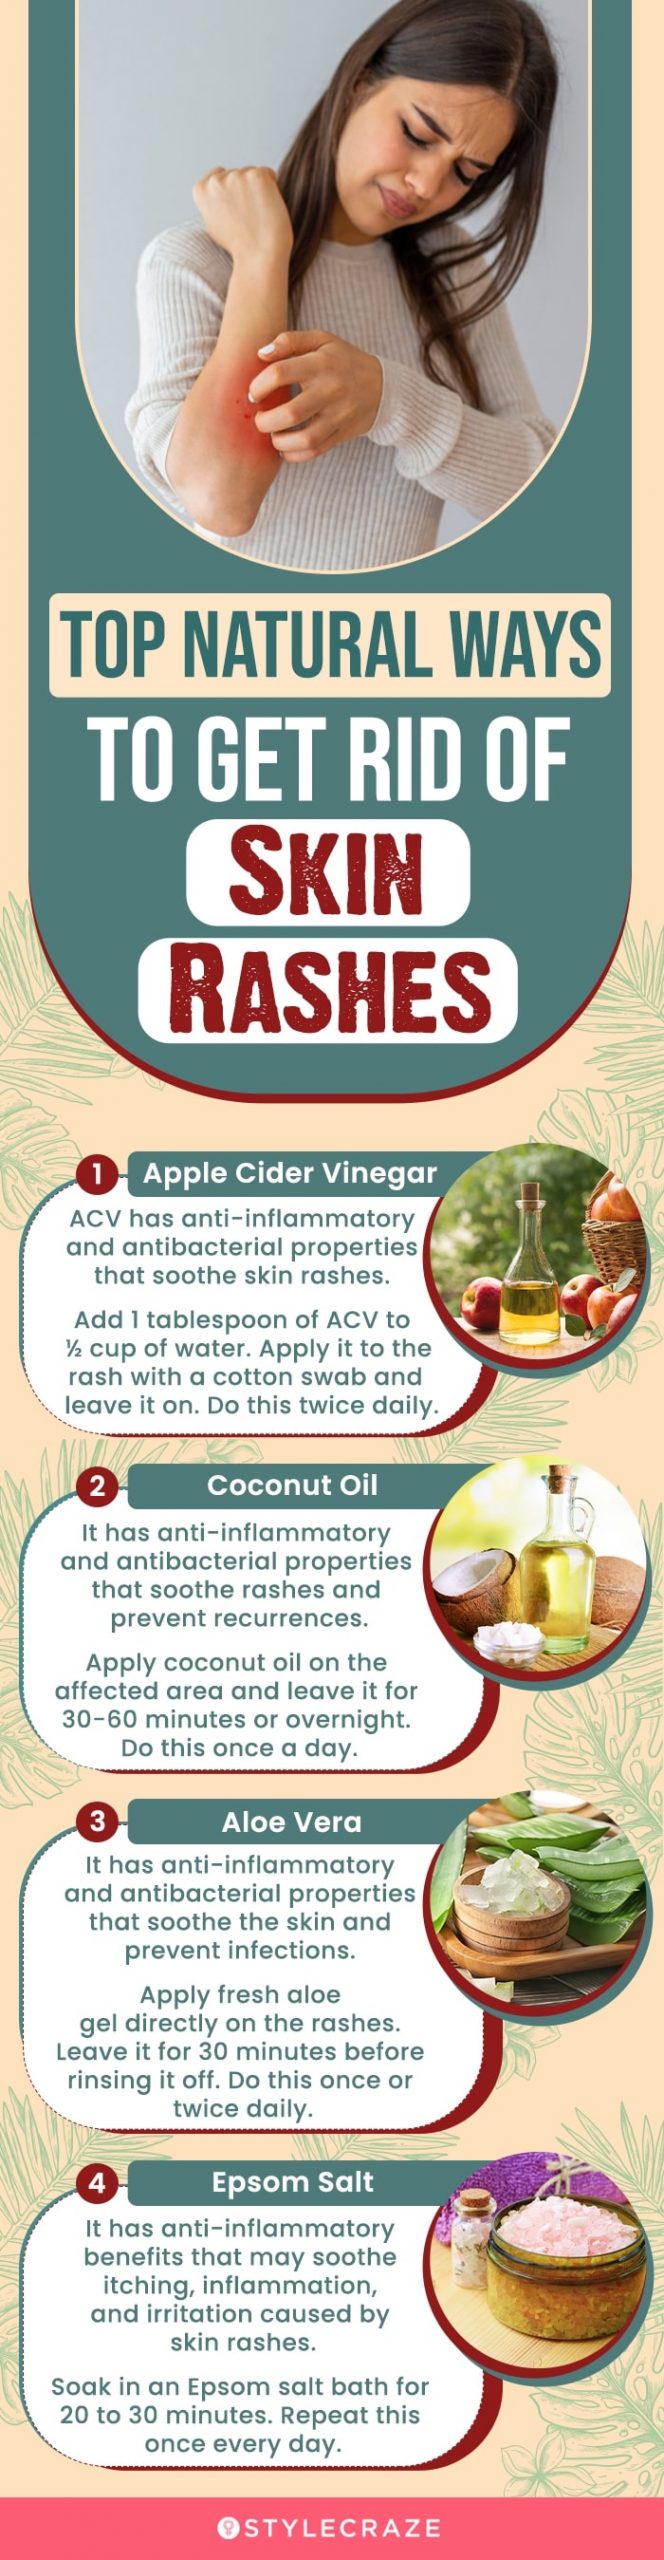 top natural ways to get rid of skin rashes (infographic)